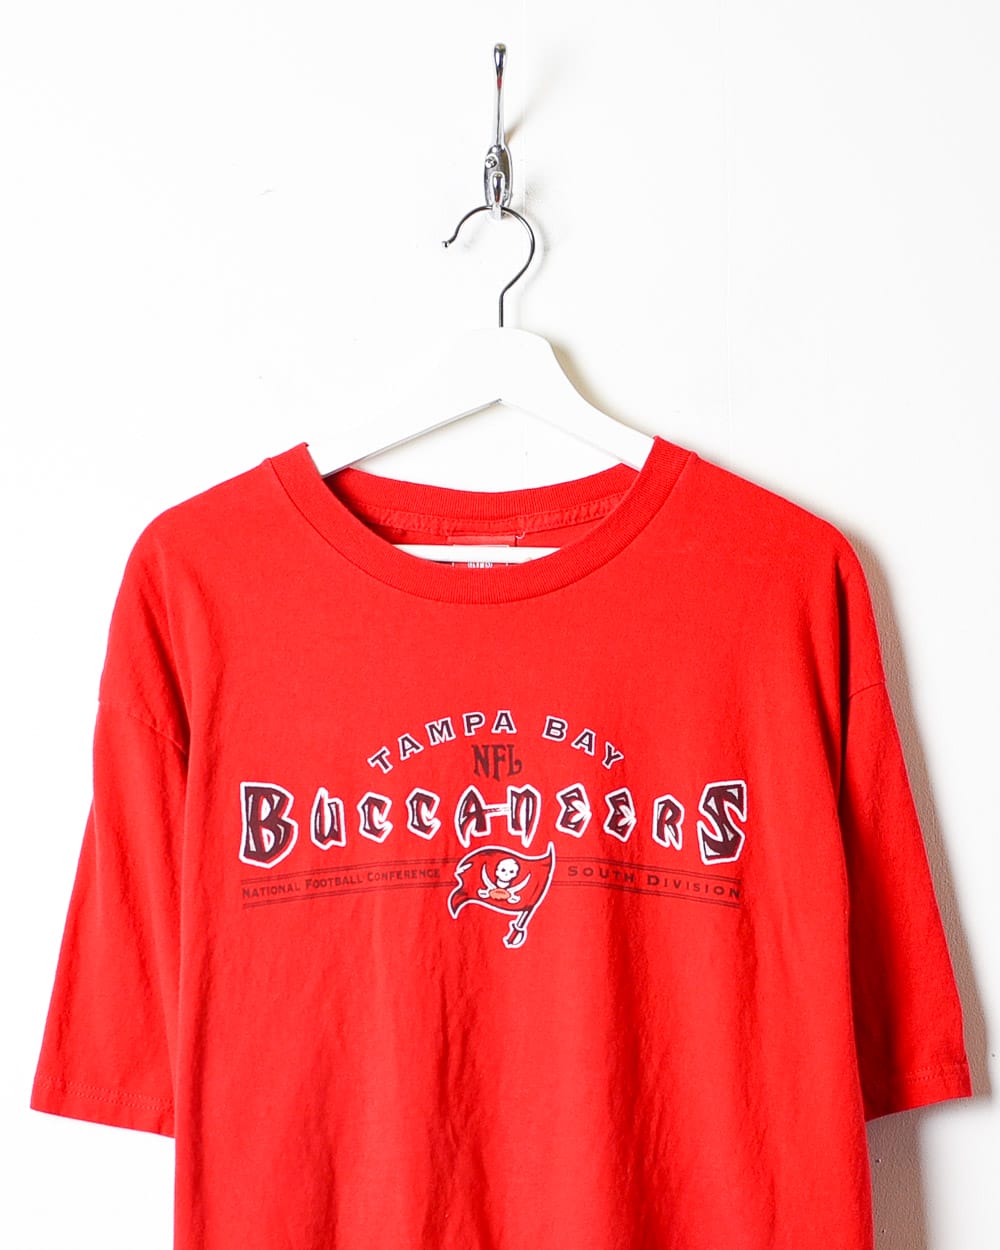 Red NFL Tampa Bay Buccaneers T-Shirt - X-Large